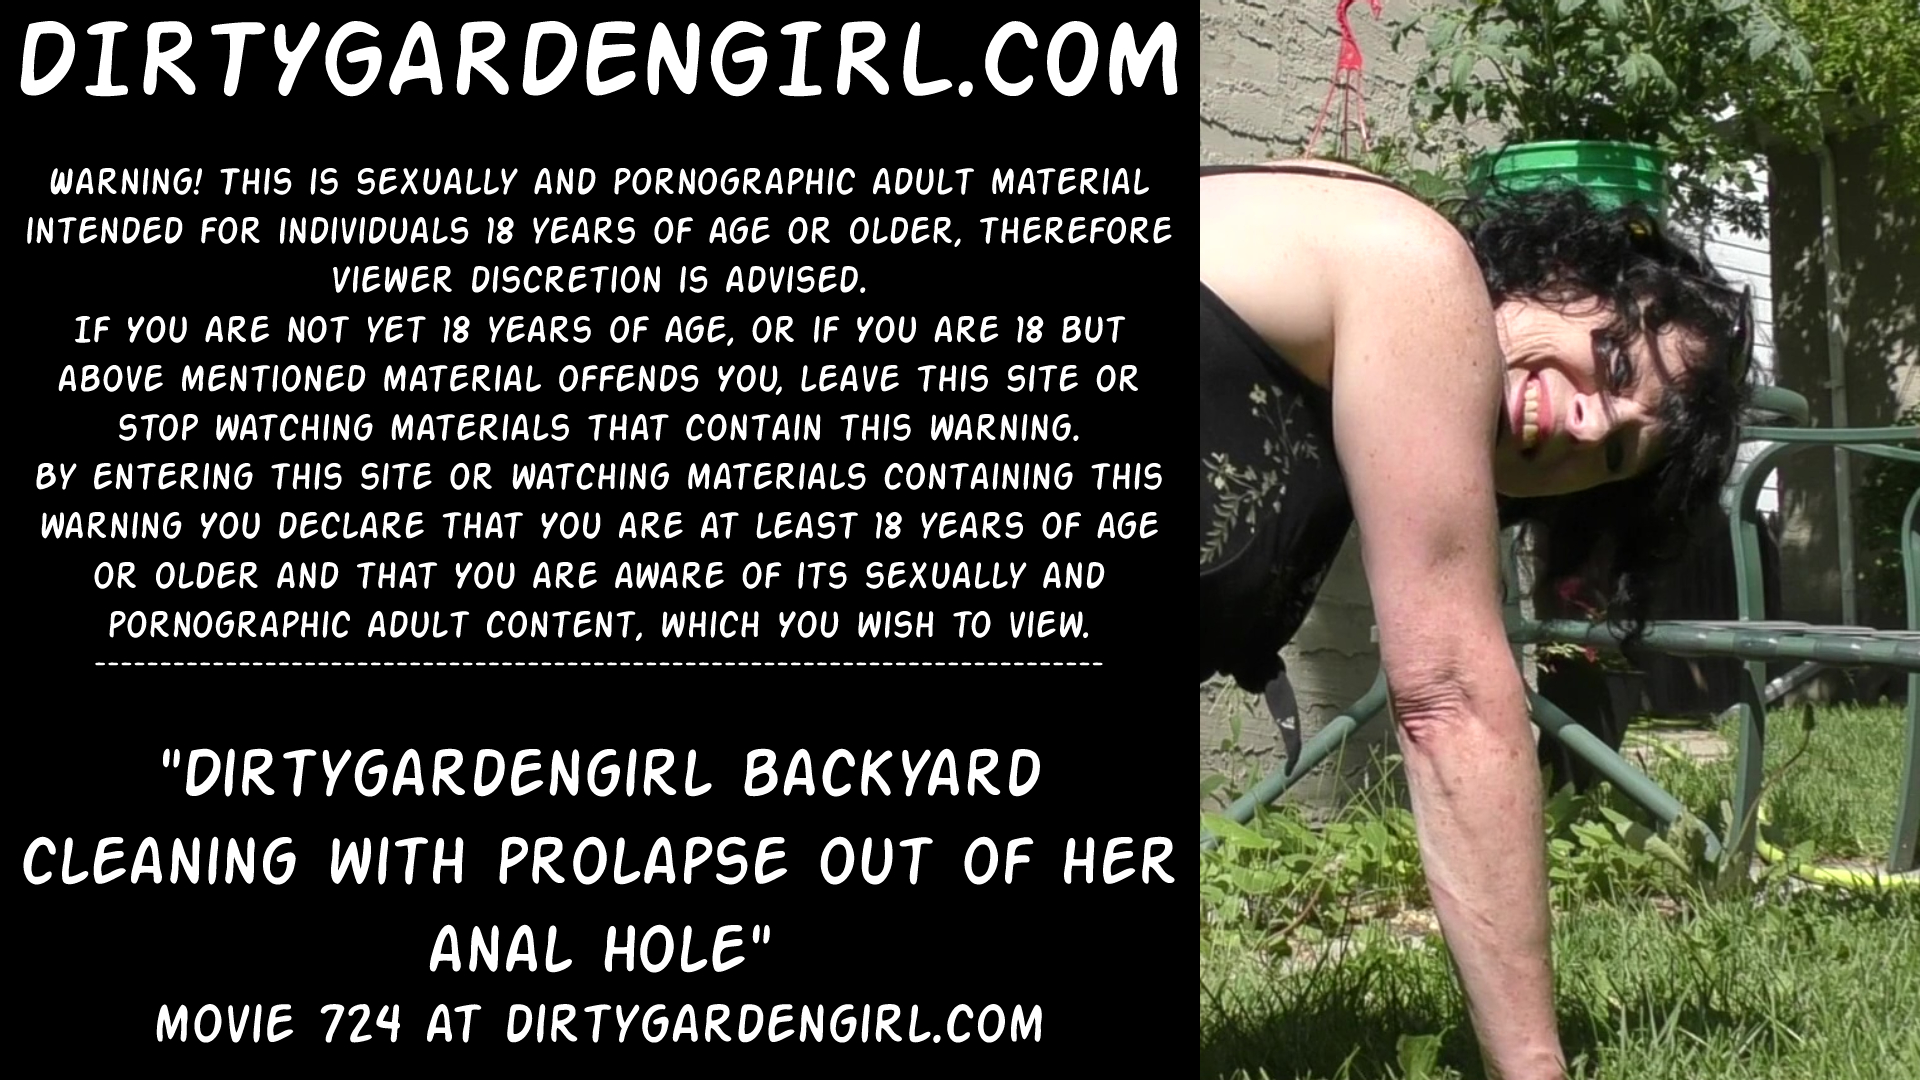 Dirtygardengirl backyard cleaning with prolapse out